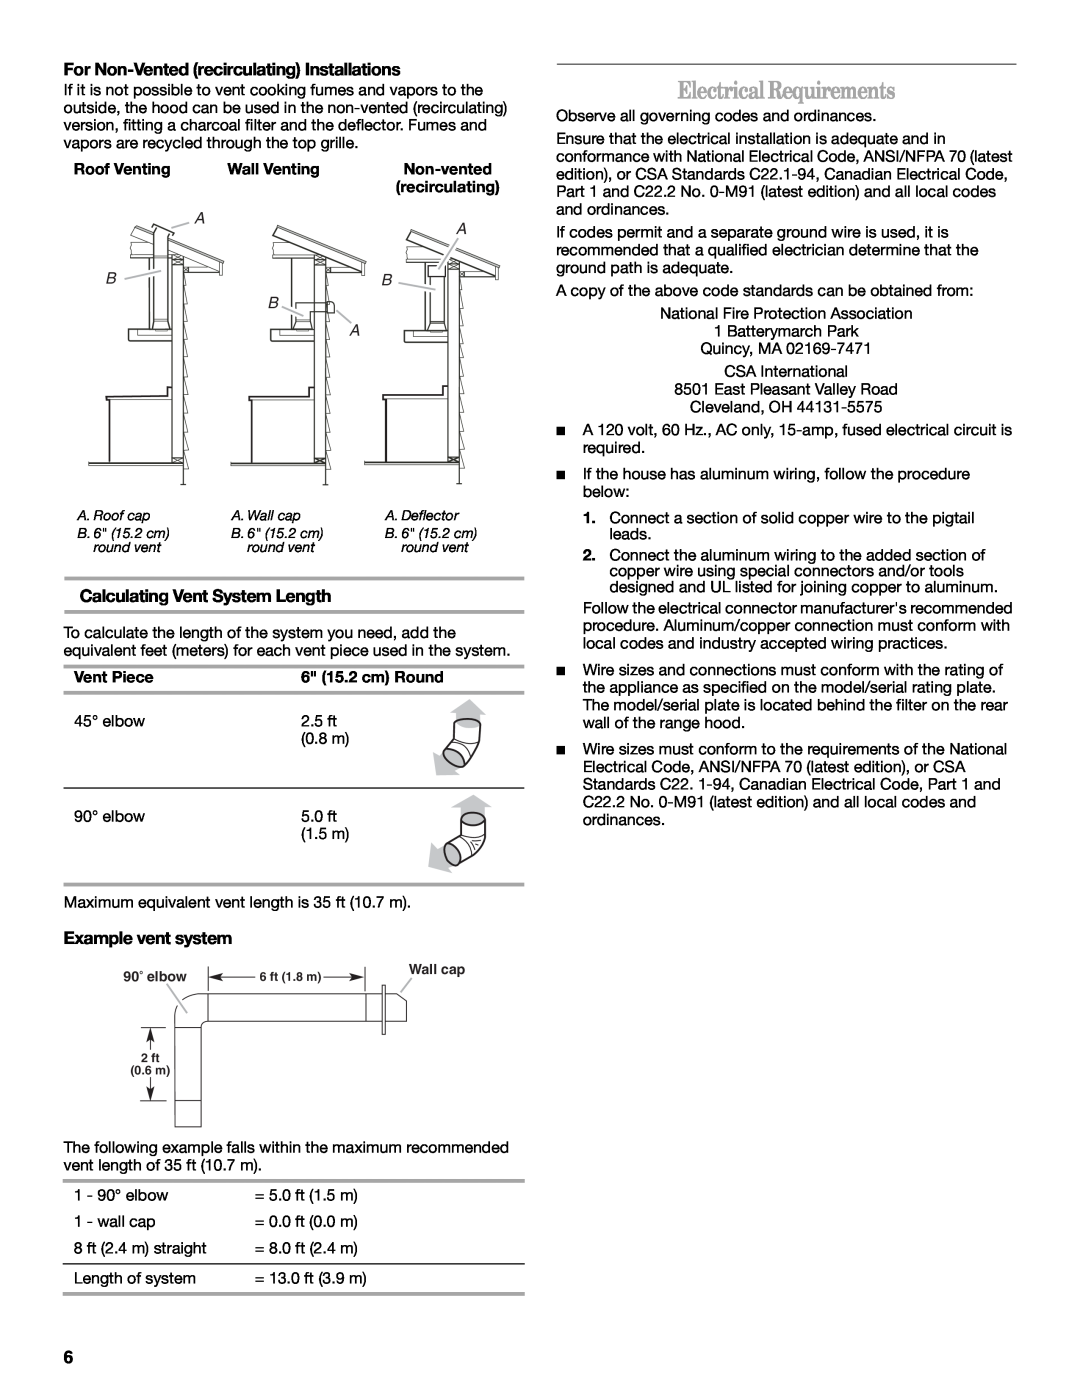 Whirlpool GXW6536DXS Electrical Requirements, For Non-Vented recirculating Installations, Calculating Vent System Length 